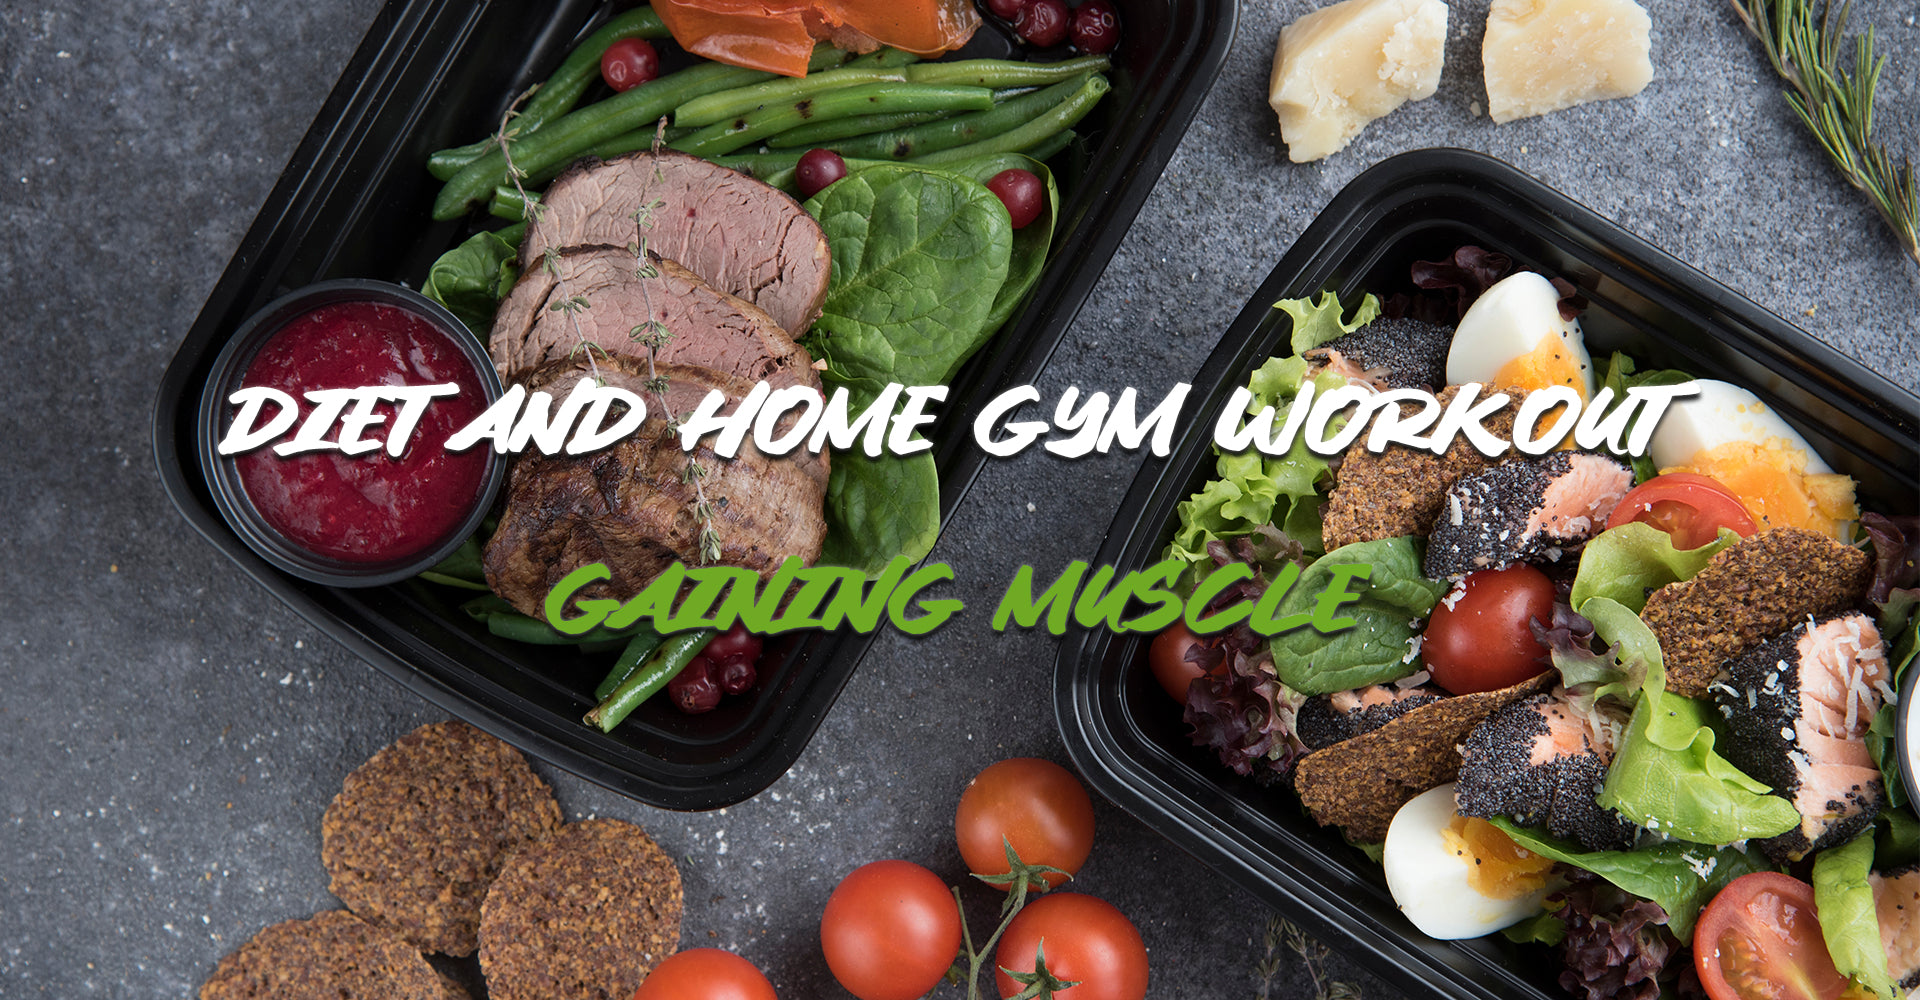 Diet And Home Gym Workout: Gaining Muscle